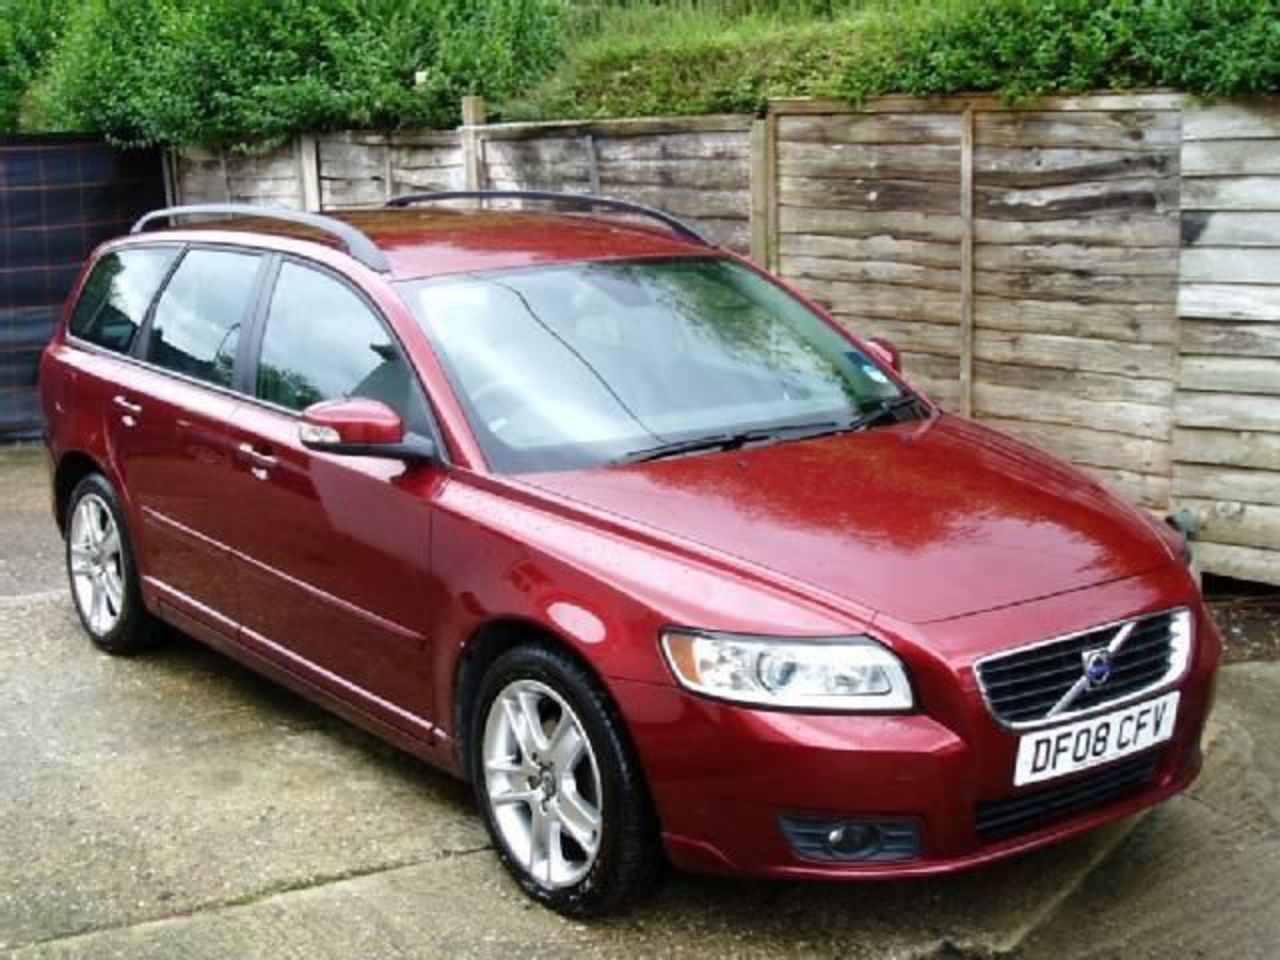 Volvo V50 24i. View Download Wallpaper. 640x480. Comments